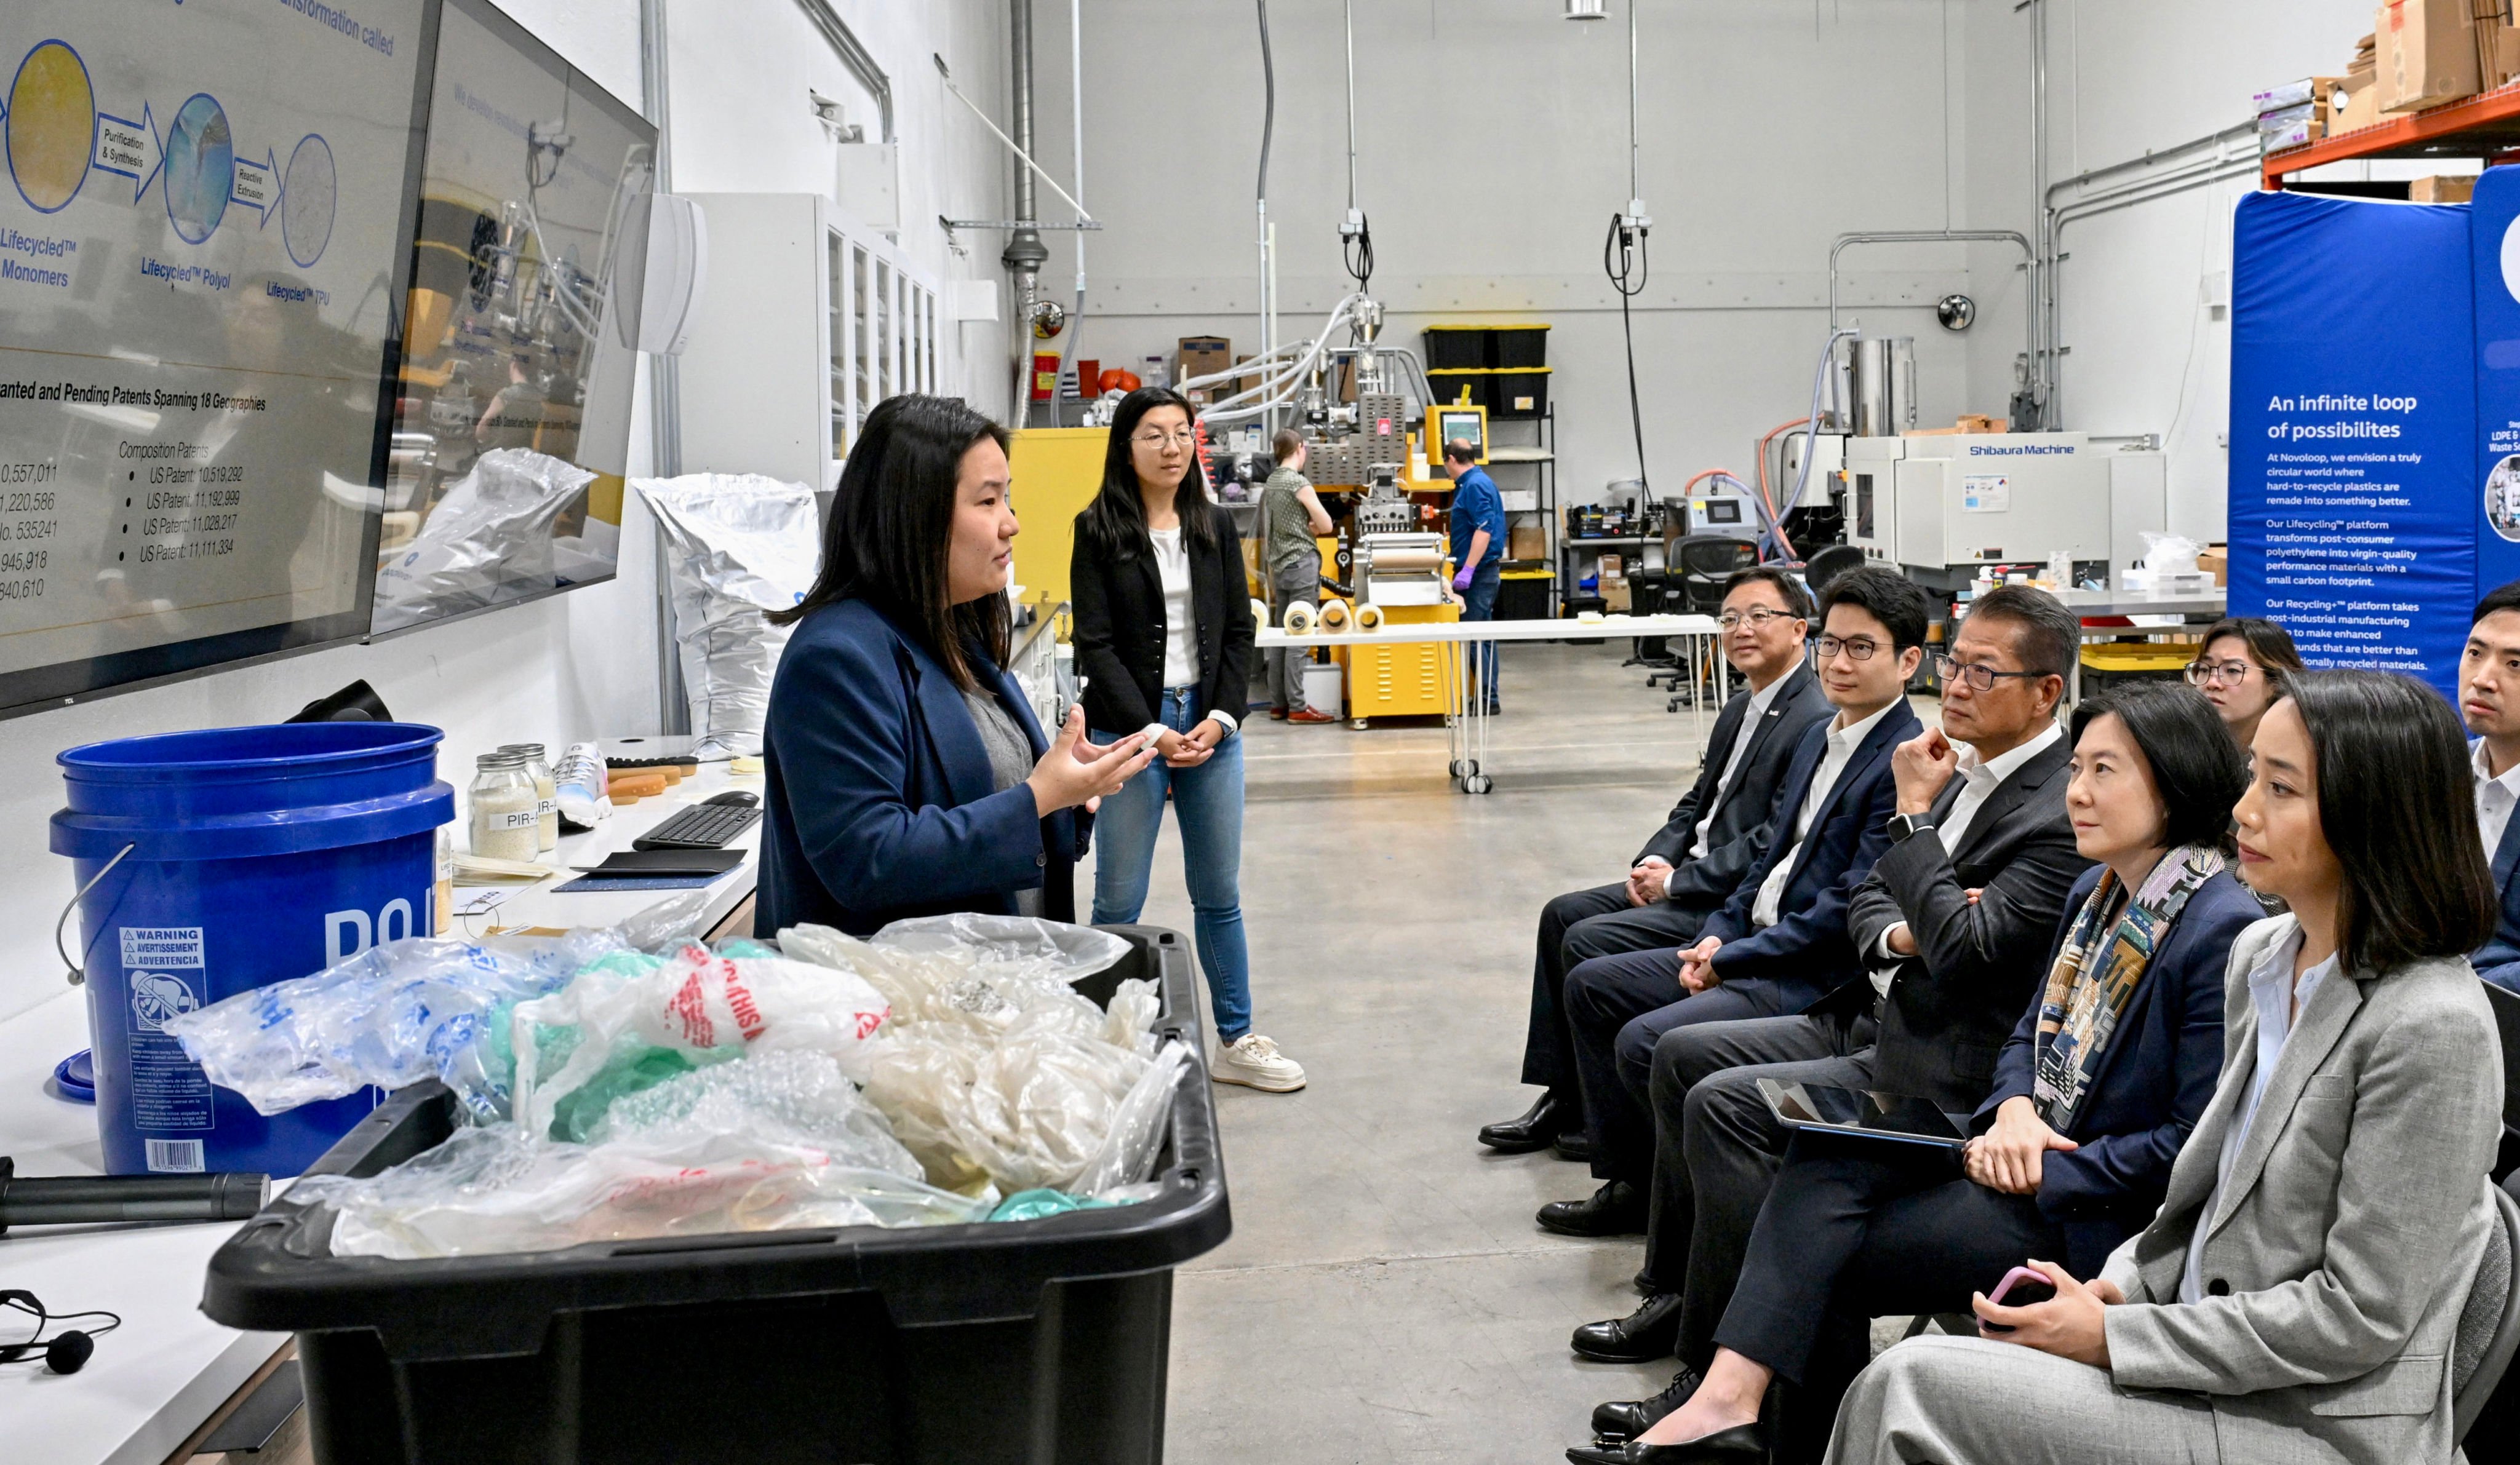 Financial Secretary Paul Chan (third right) and InvestHK’s Director General Alpha Lau (second right) visit a technology company engaged in plastic materials recycling in San Francisco. Photo: SCMP